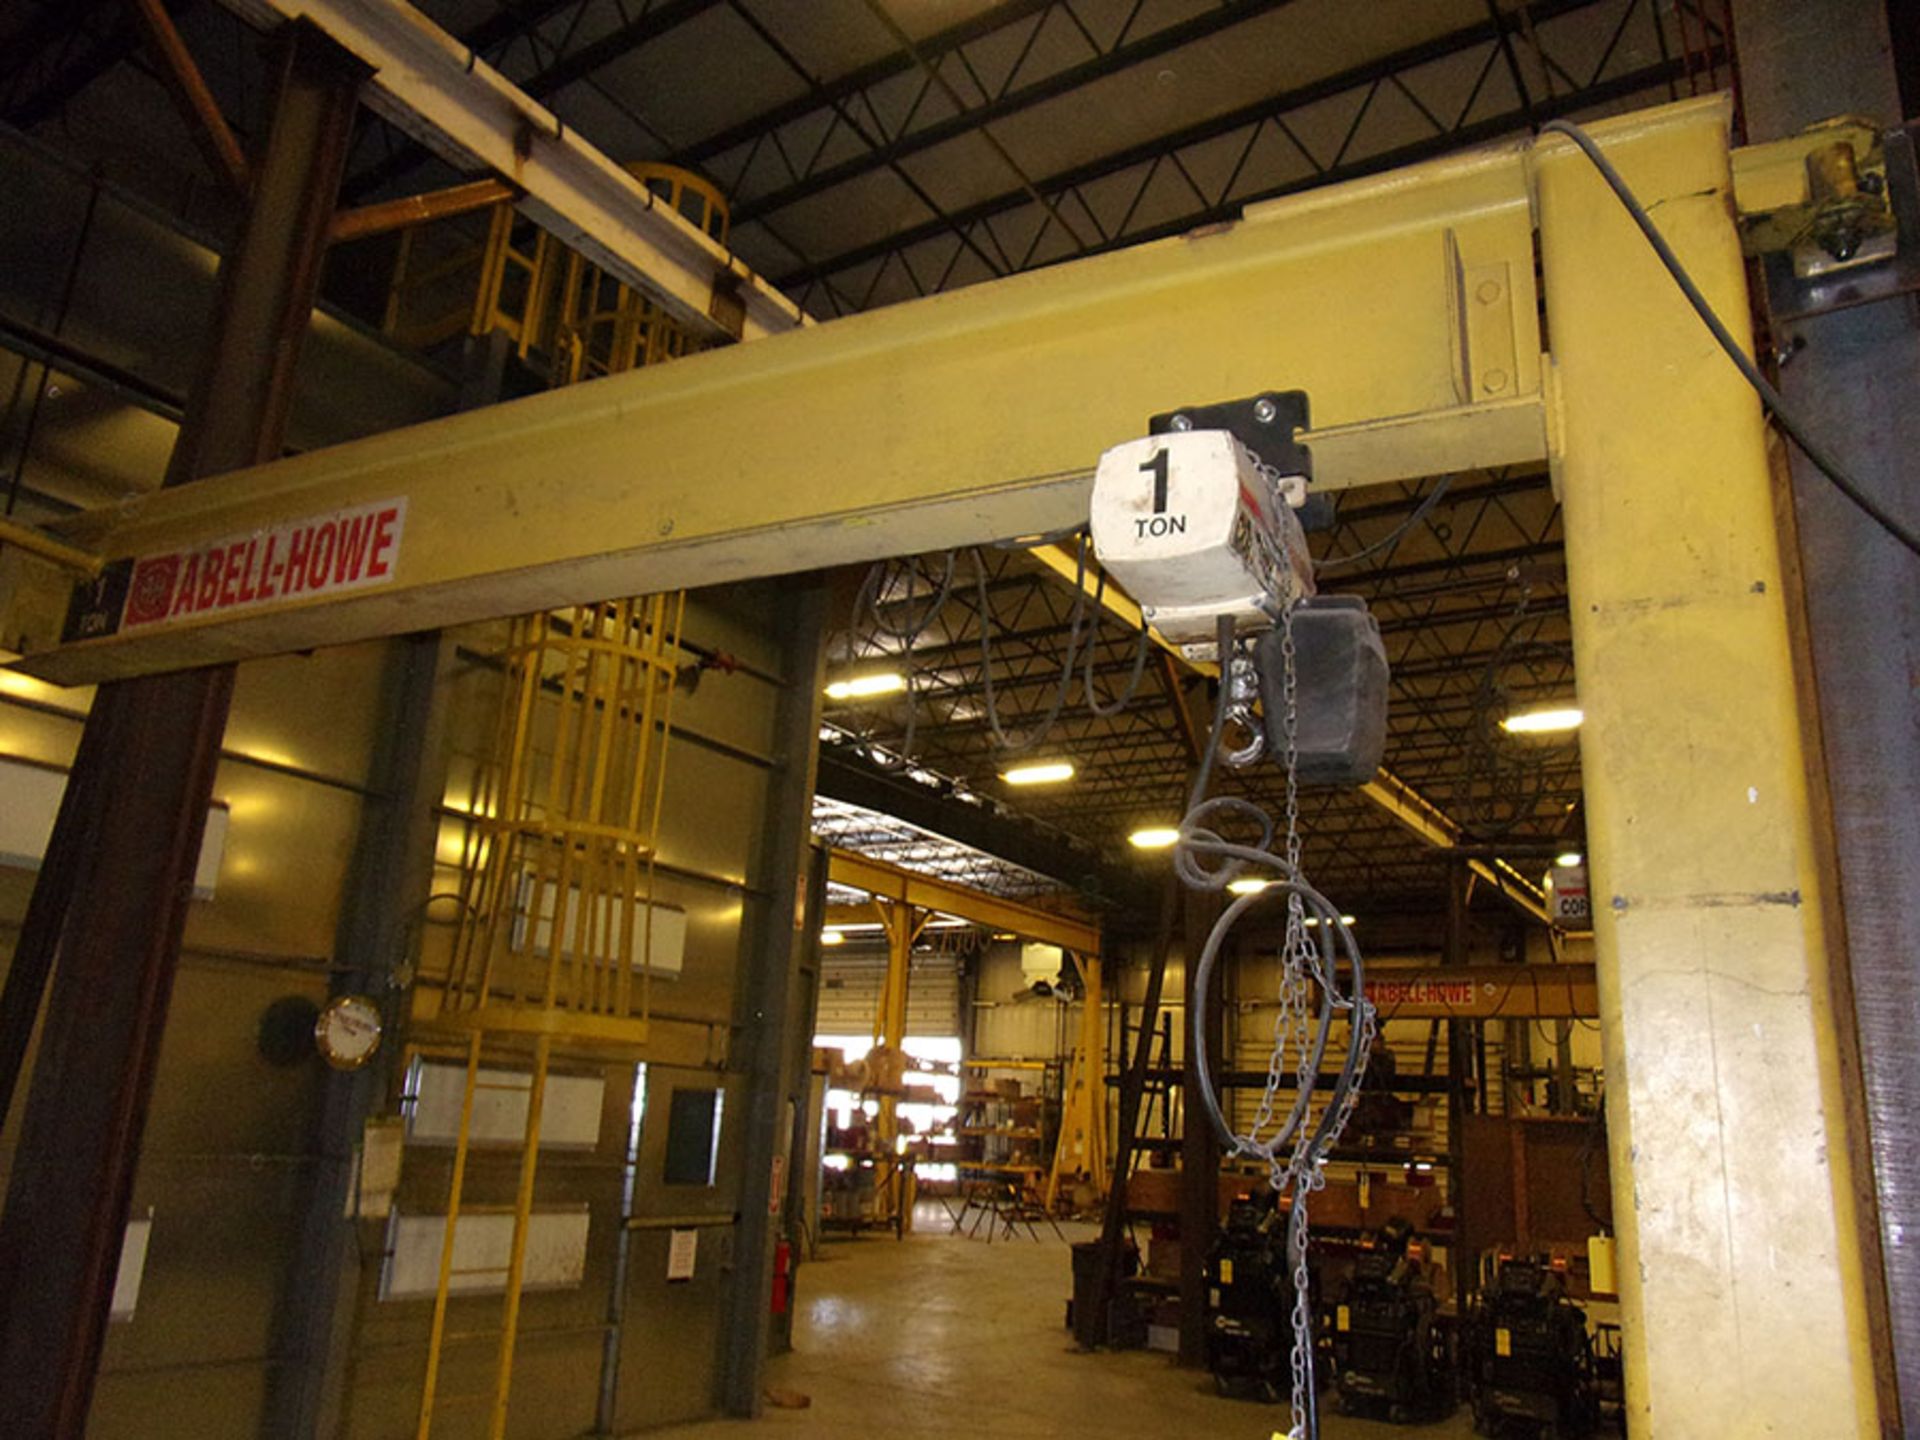 ABELL HOWE 1-TON JIB WITH COFFING 1-TON ELECTRIC HOIST